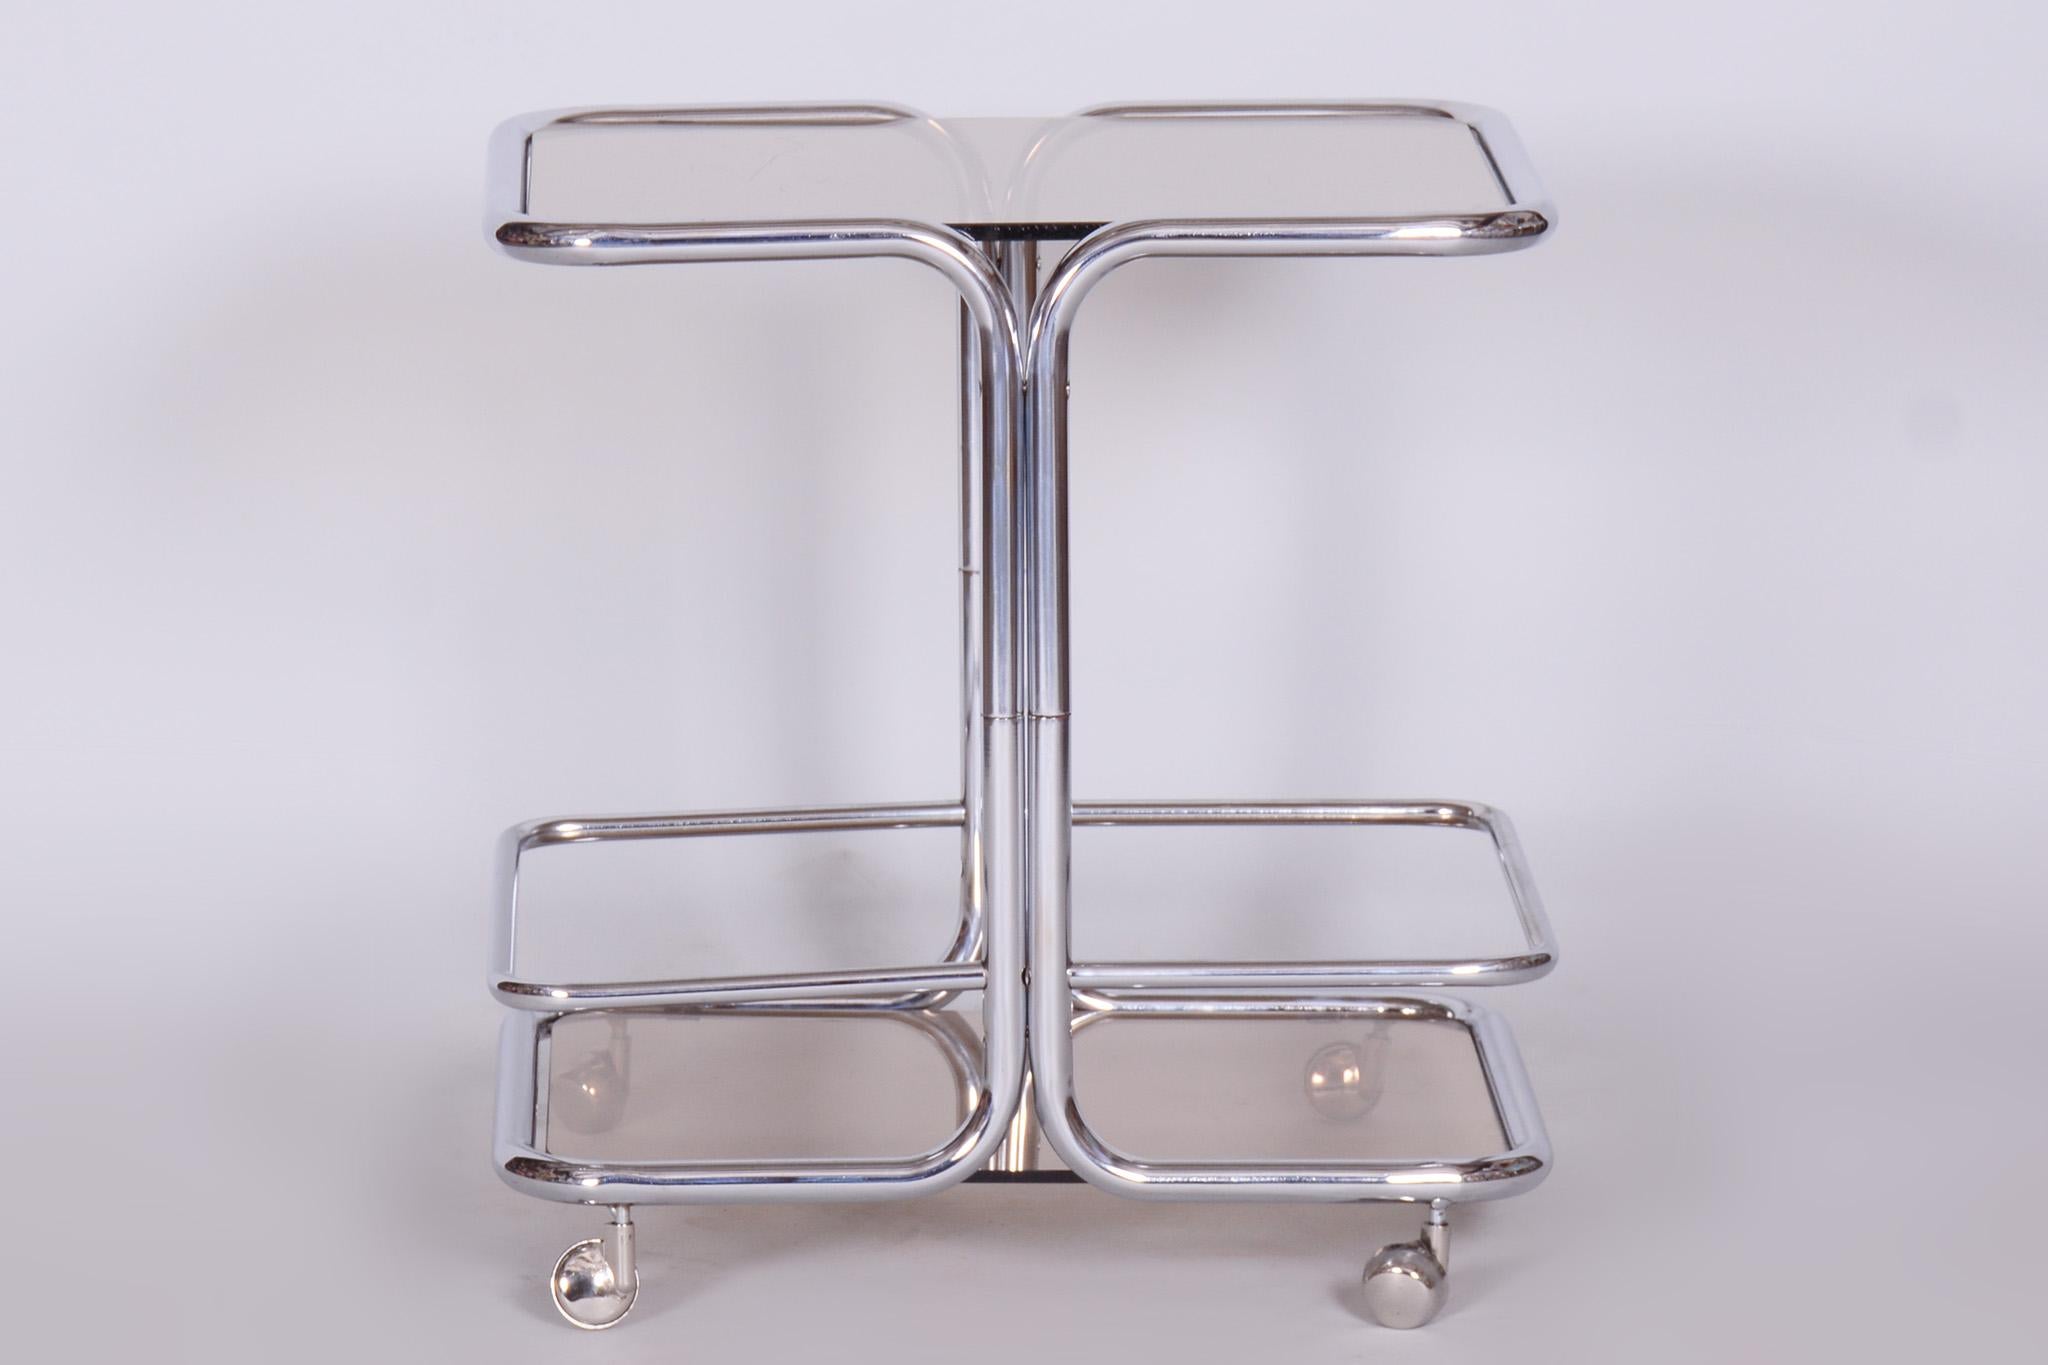 Original midcentury chrome serving trolley.

Period: 1960-1969
Source: Czechia
Material: smoked glass, chrome-plated steel

Original very well-preserved condition.